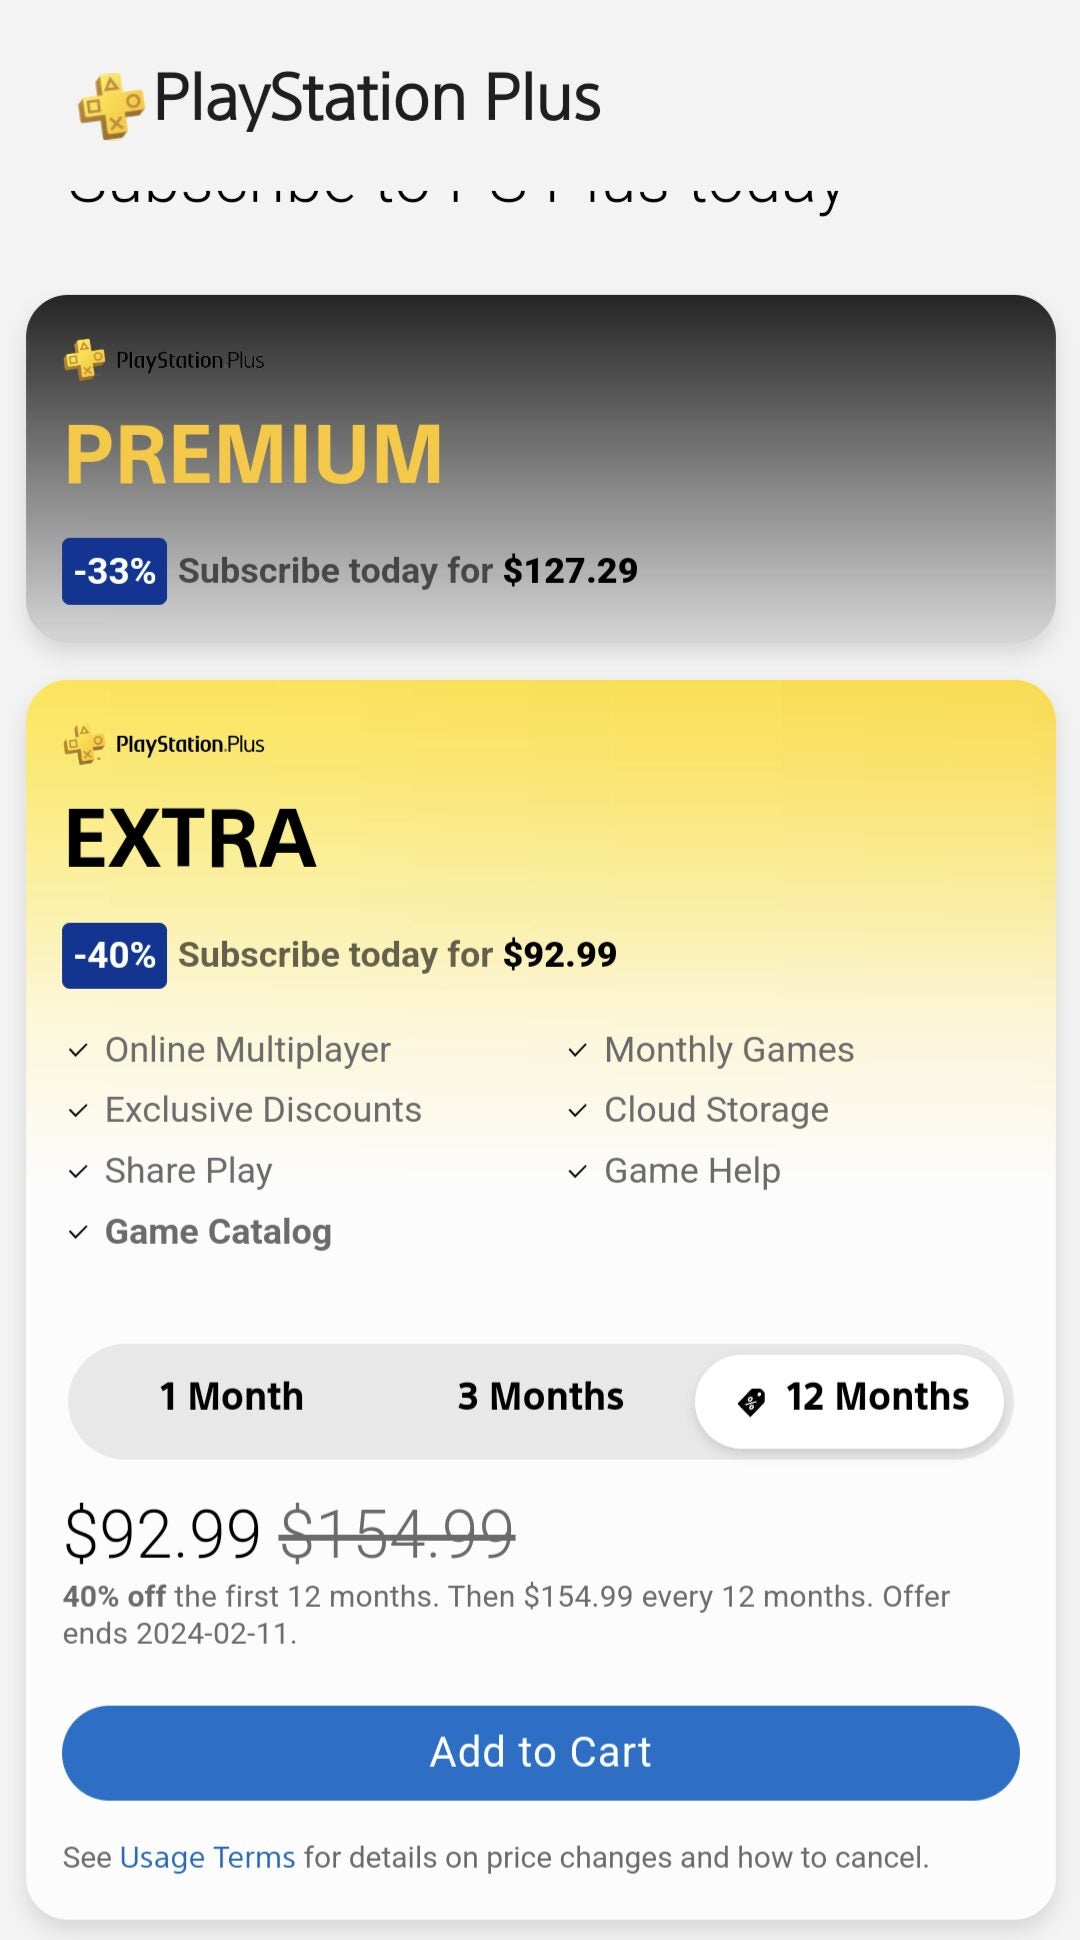 Sony] YMMV PlayStation Plus 12 month Premium $127.29 (33%) and Extra $92.99  (40%) - RedFlagDeals.com Forums